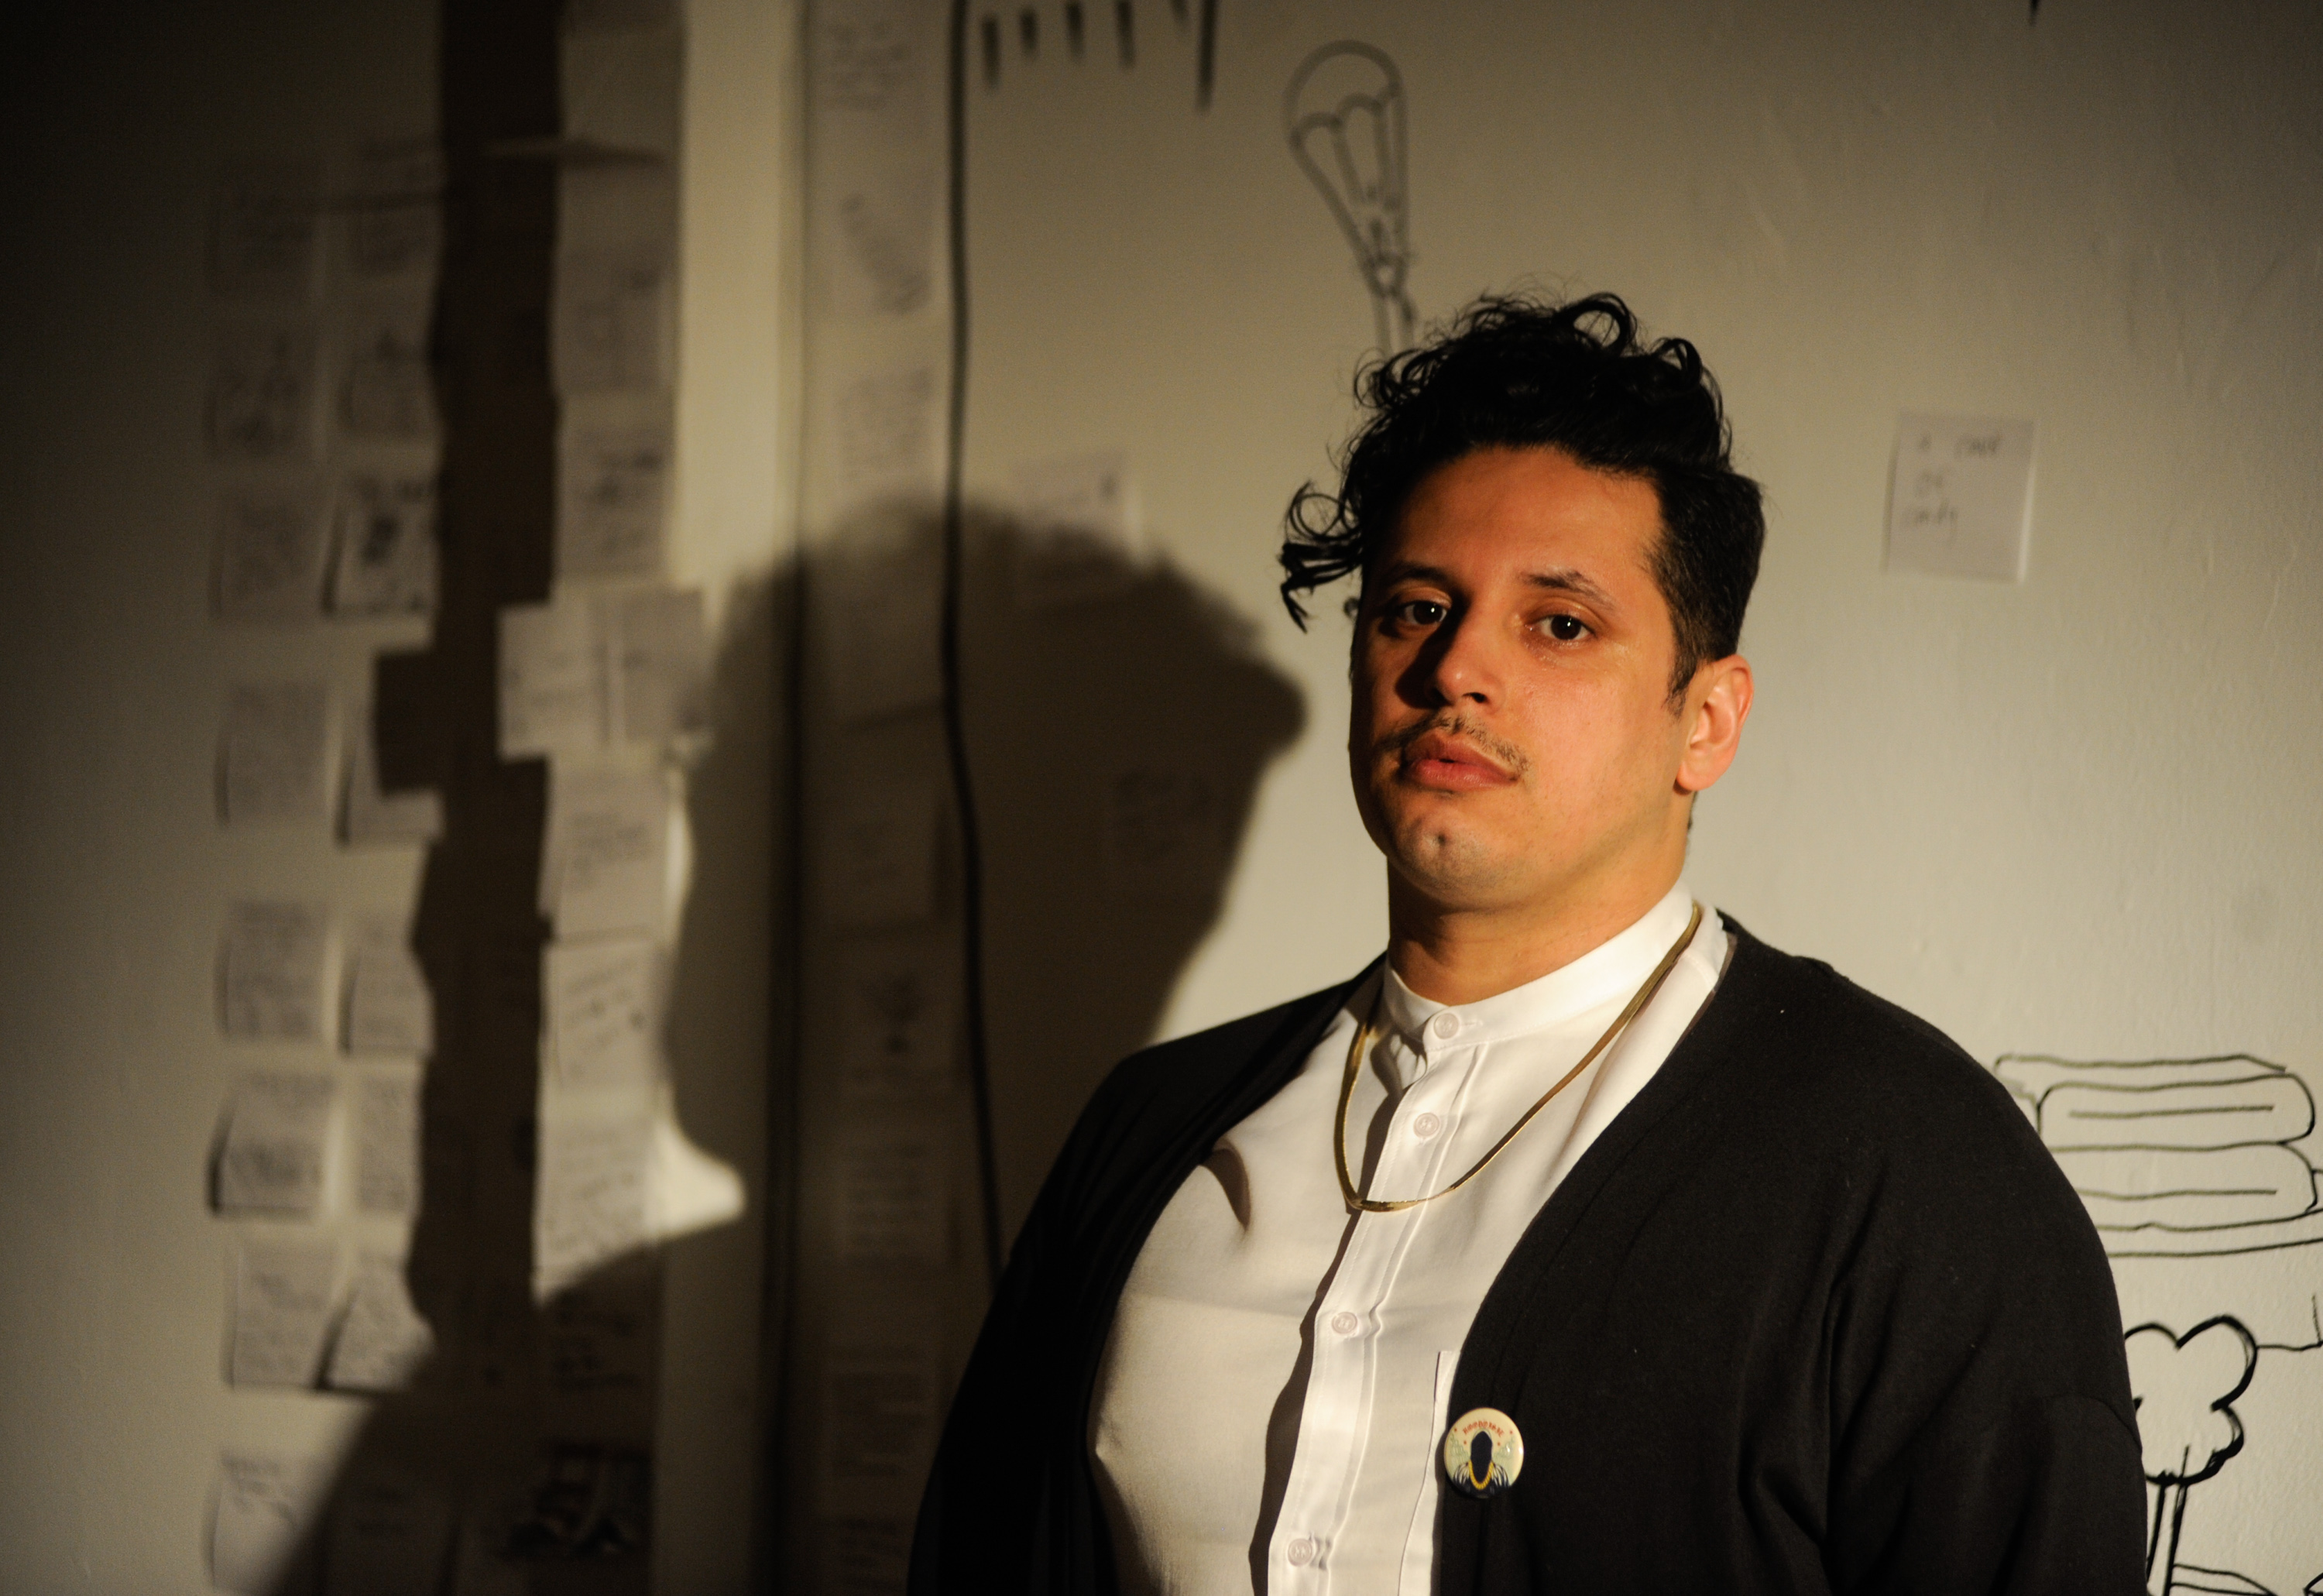 Ricardo Gamboa, host of the Hoodoisie, poses right before the start of February 3rd's episode at the Chicago Art Department. Gamboa wears a white button-up shirt, gold chain, and black sweater with a Hoodoisie pin. Their shadow is case on the white wall behind them. Photo by William Camargo